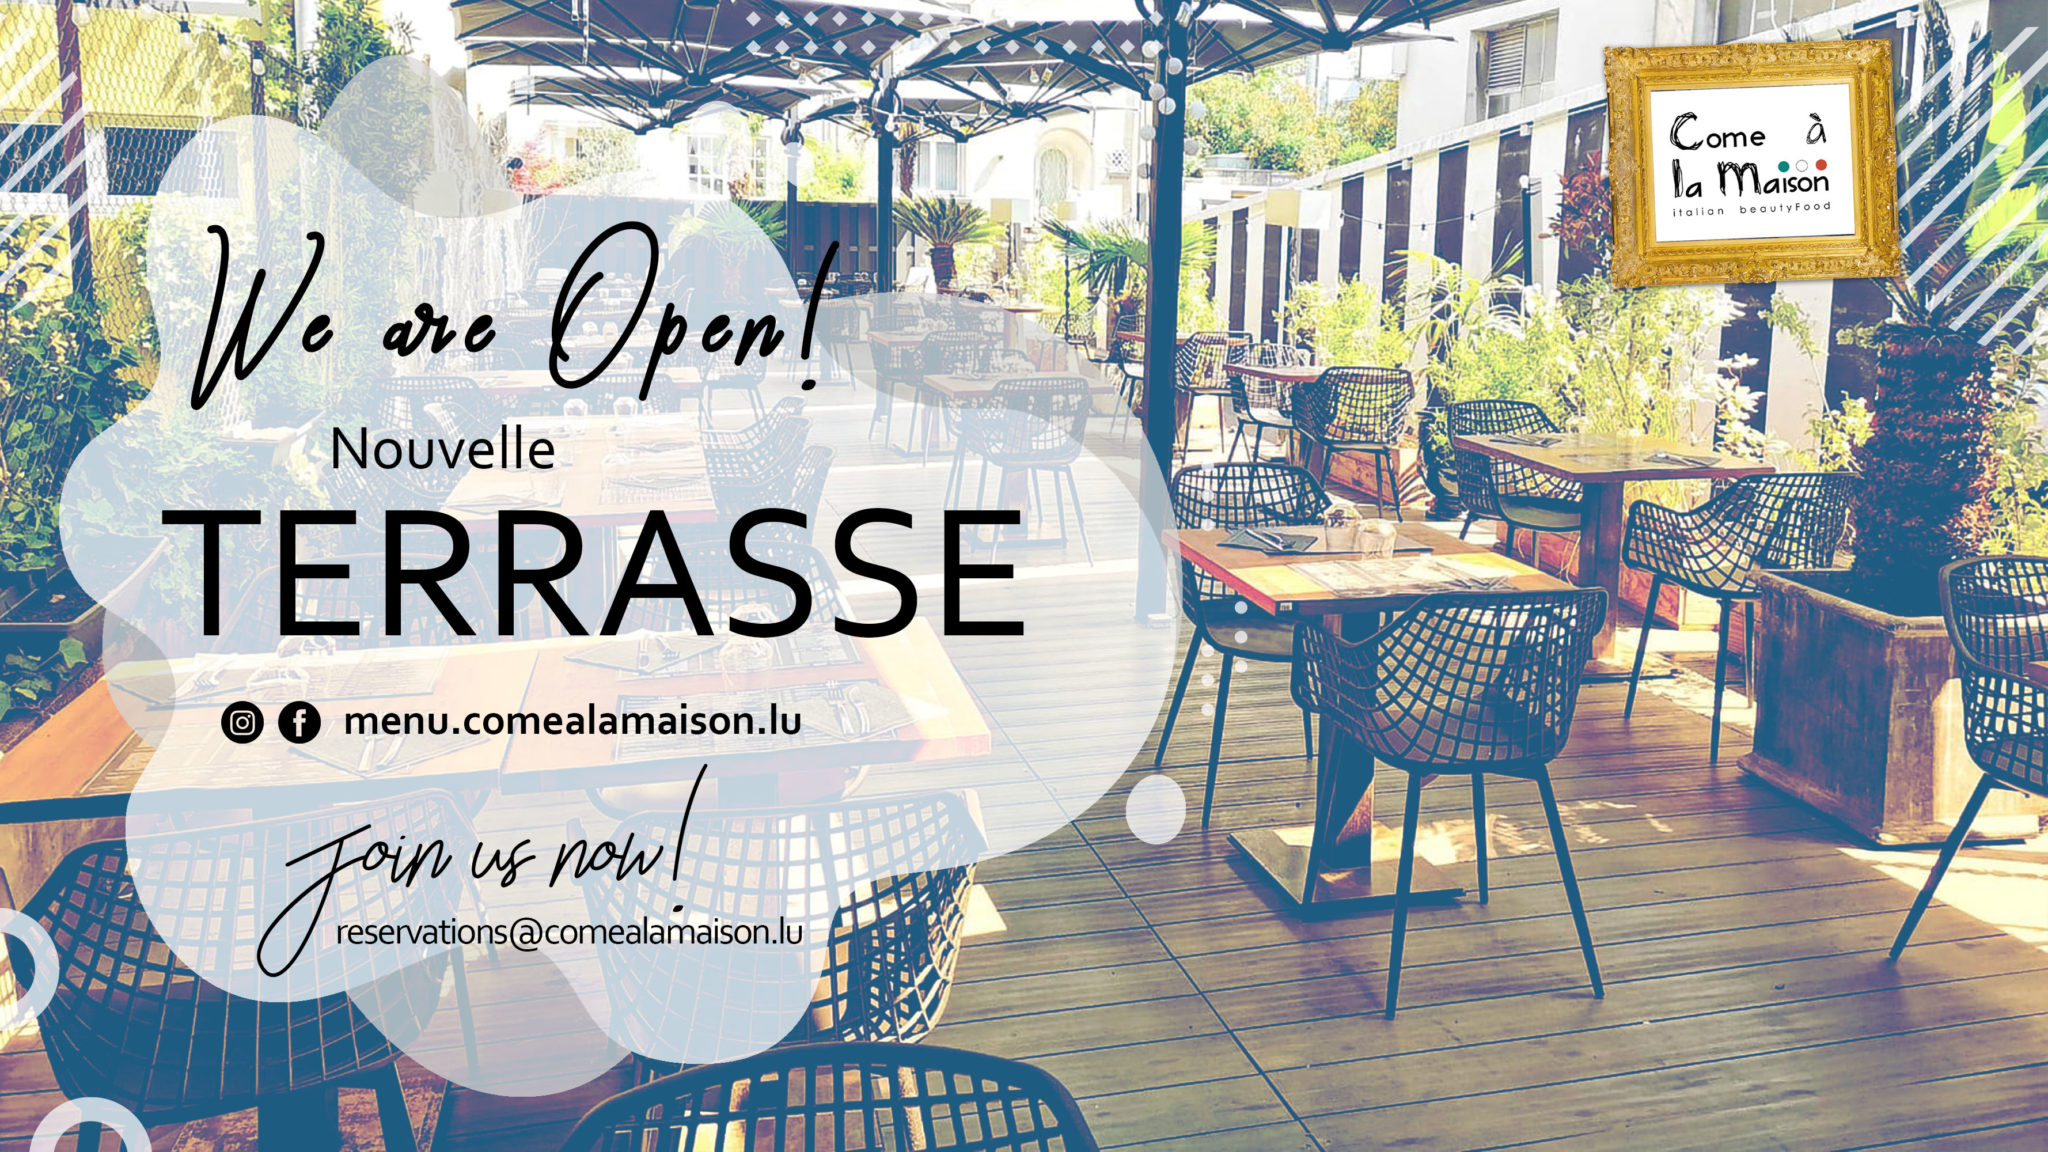 YES! WE ARE OPEN! Nouvelle Terrasse !